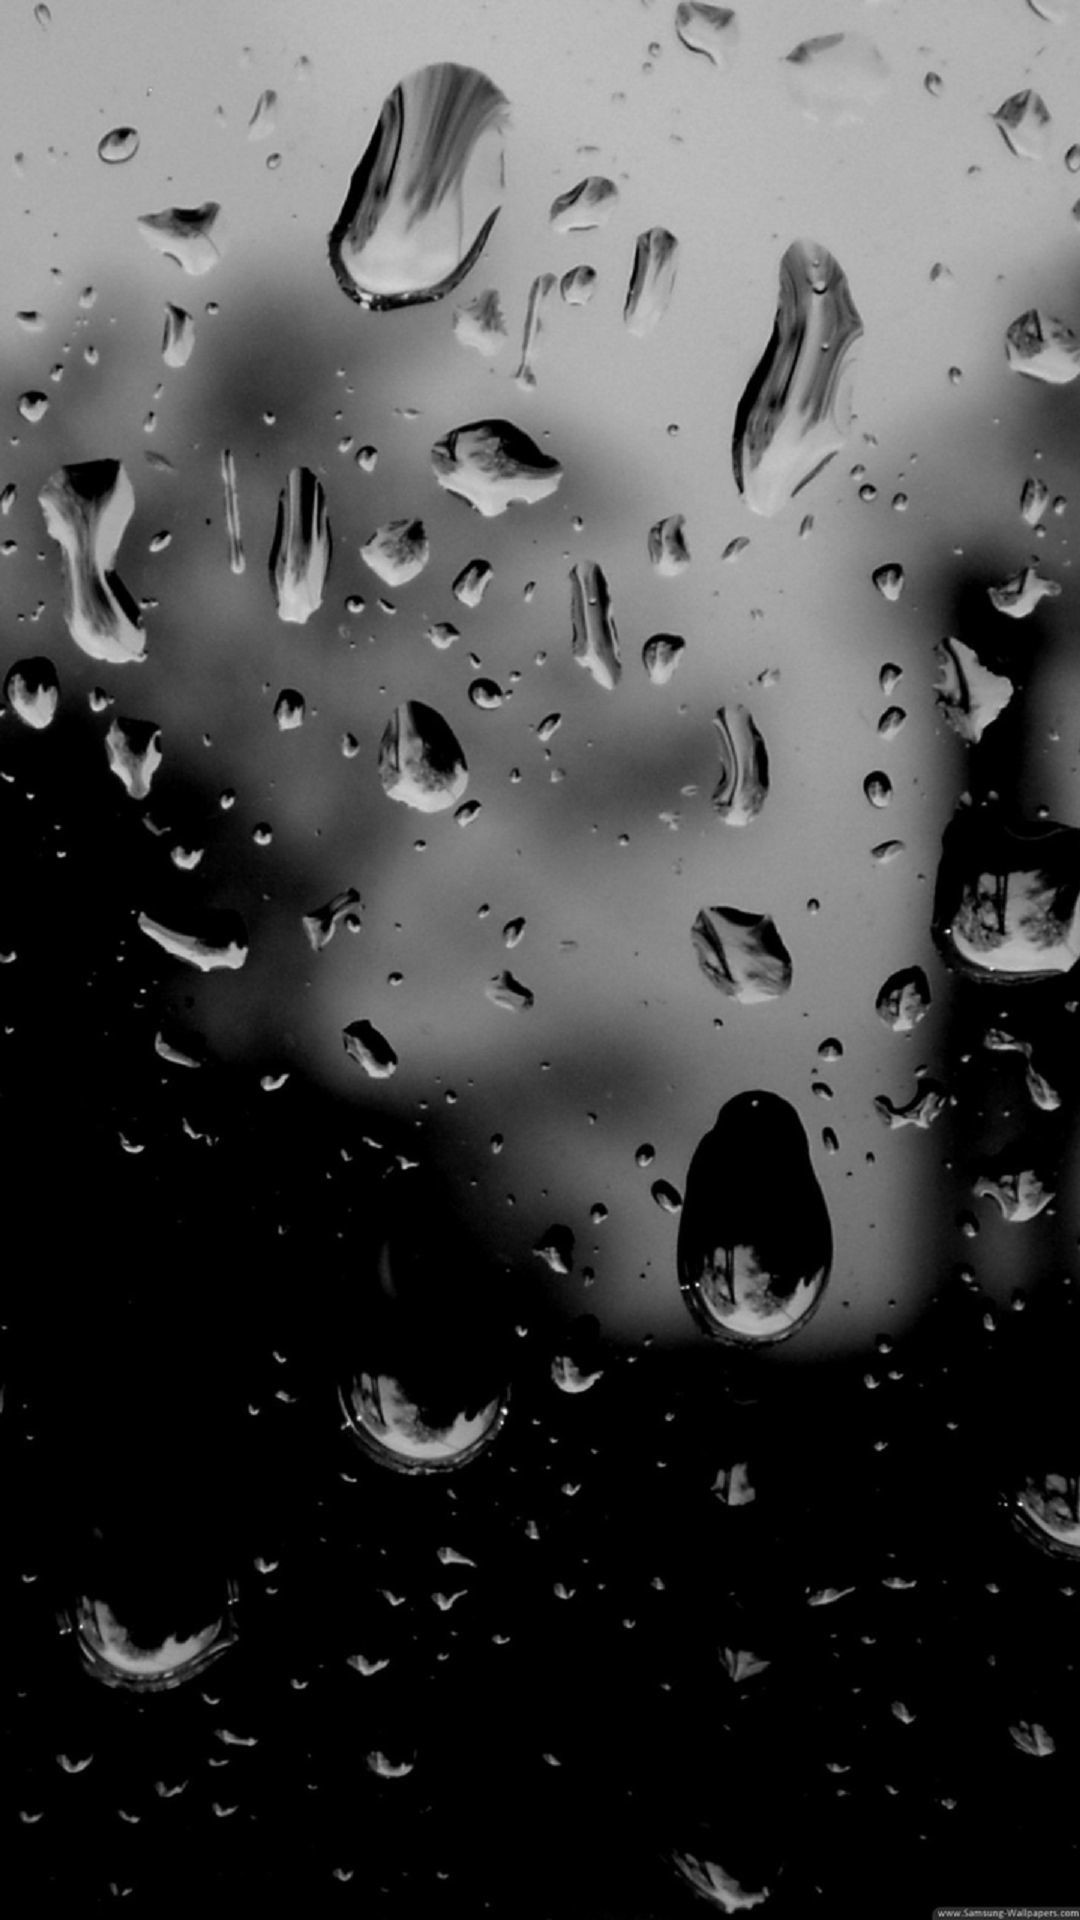 Black And White Raindrops On Glass Iphone 6 Plus Hd - Iphone Wallpaper Hd Black And White - HD Wallpaper 